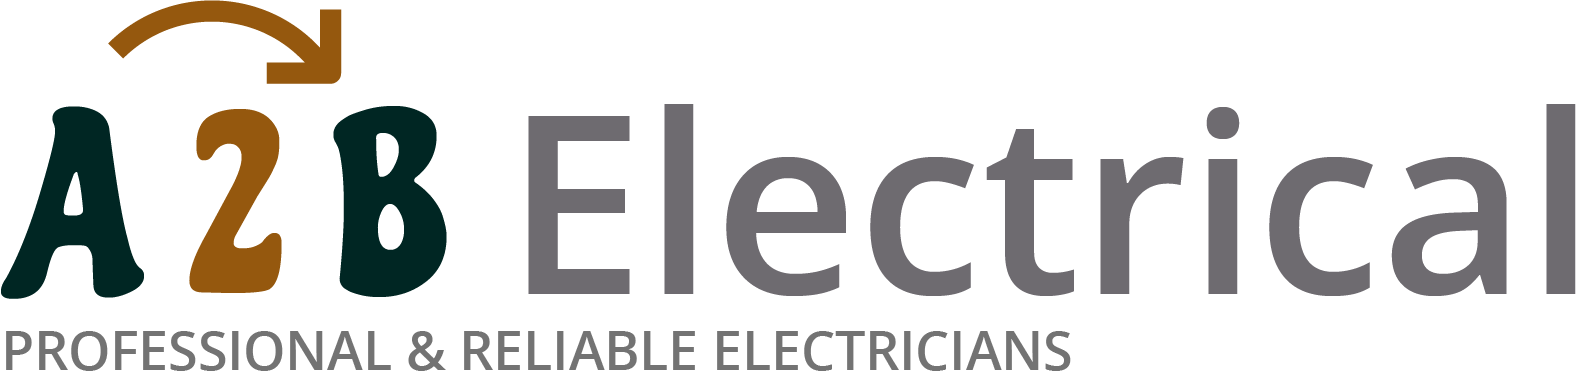 If you have electrical wiring problems in Hemel Hempstead, we can provide an electrician to have a look for you. 